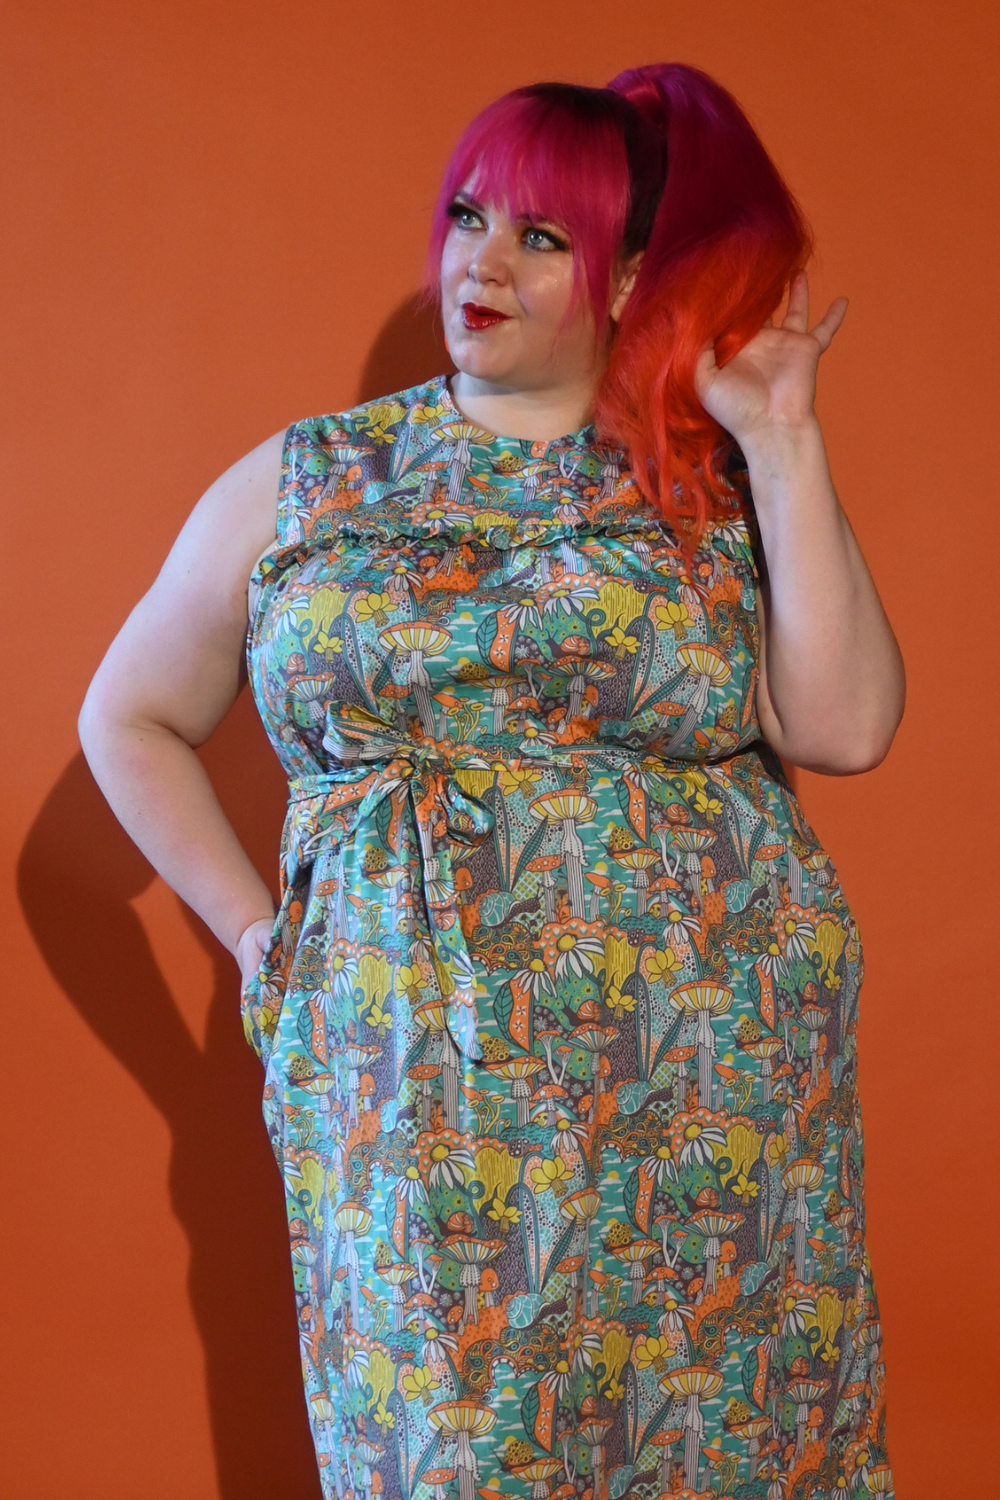 Gorgeous pink-haired model in mushroom print maxi dress in teal, yellow and orange